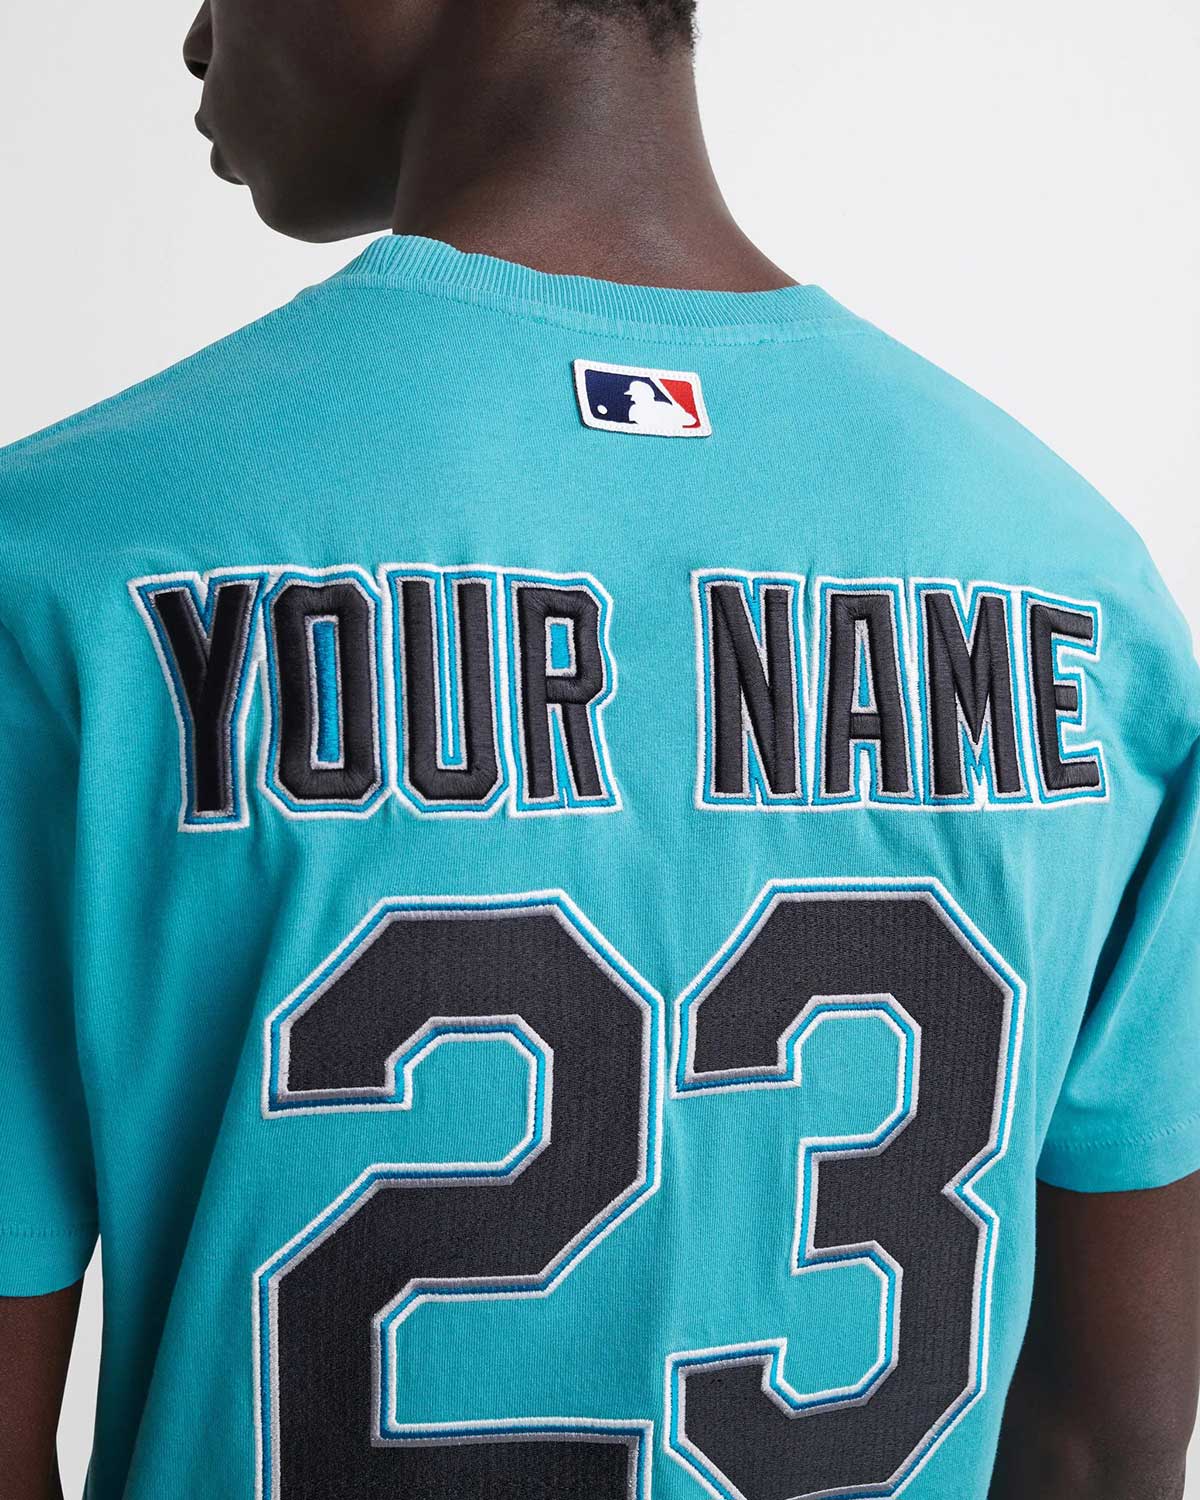 New Era heritage baseball jersey in off white - exclusive to ASOS